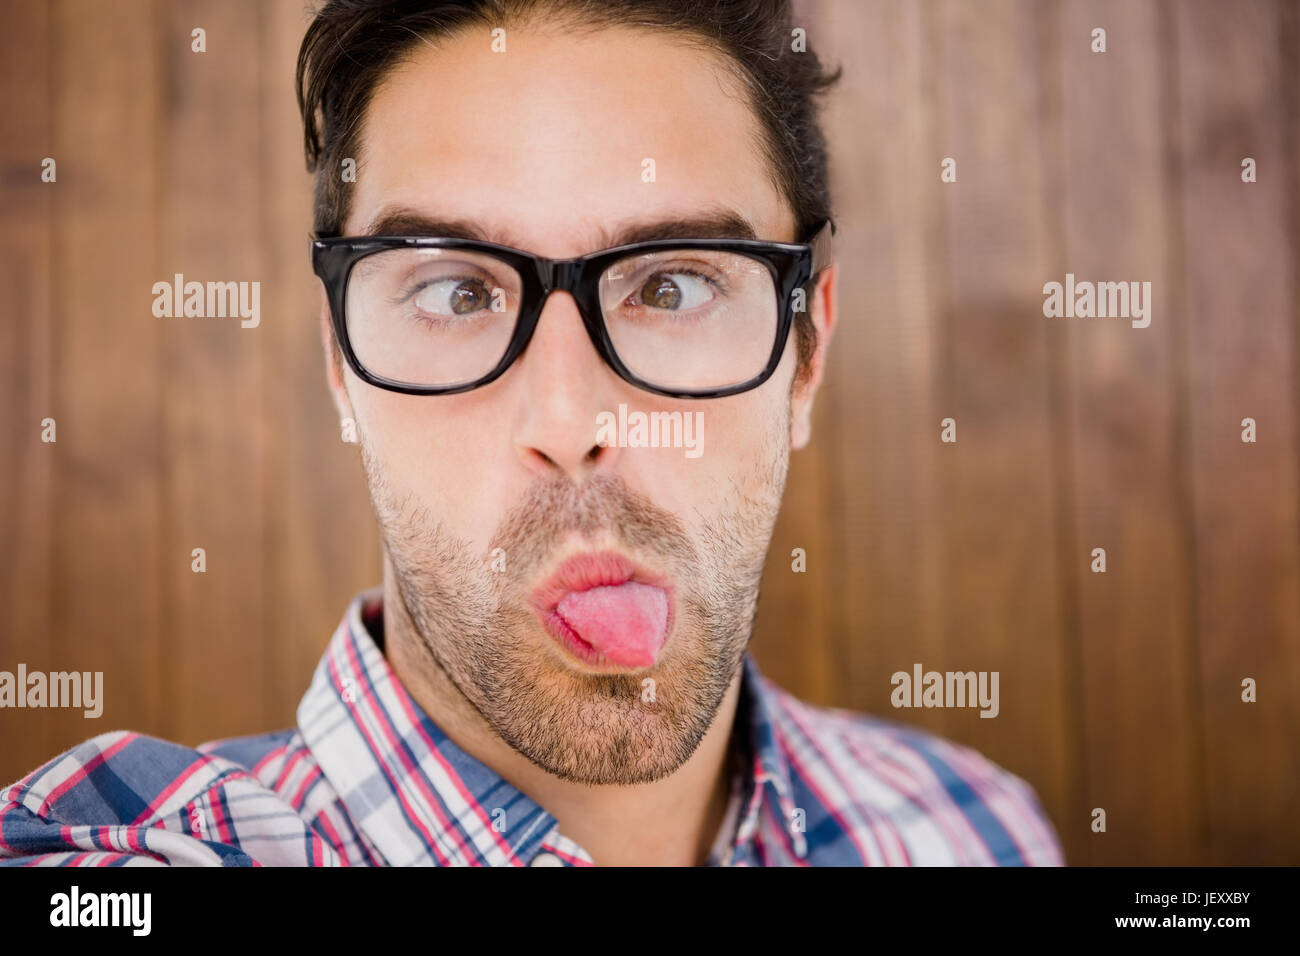 Young man pulling funny faces Stock Photo